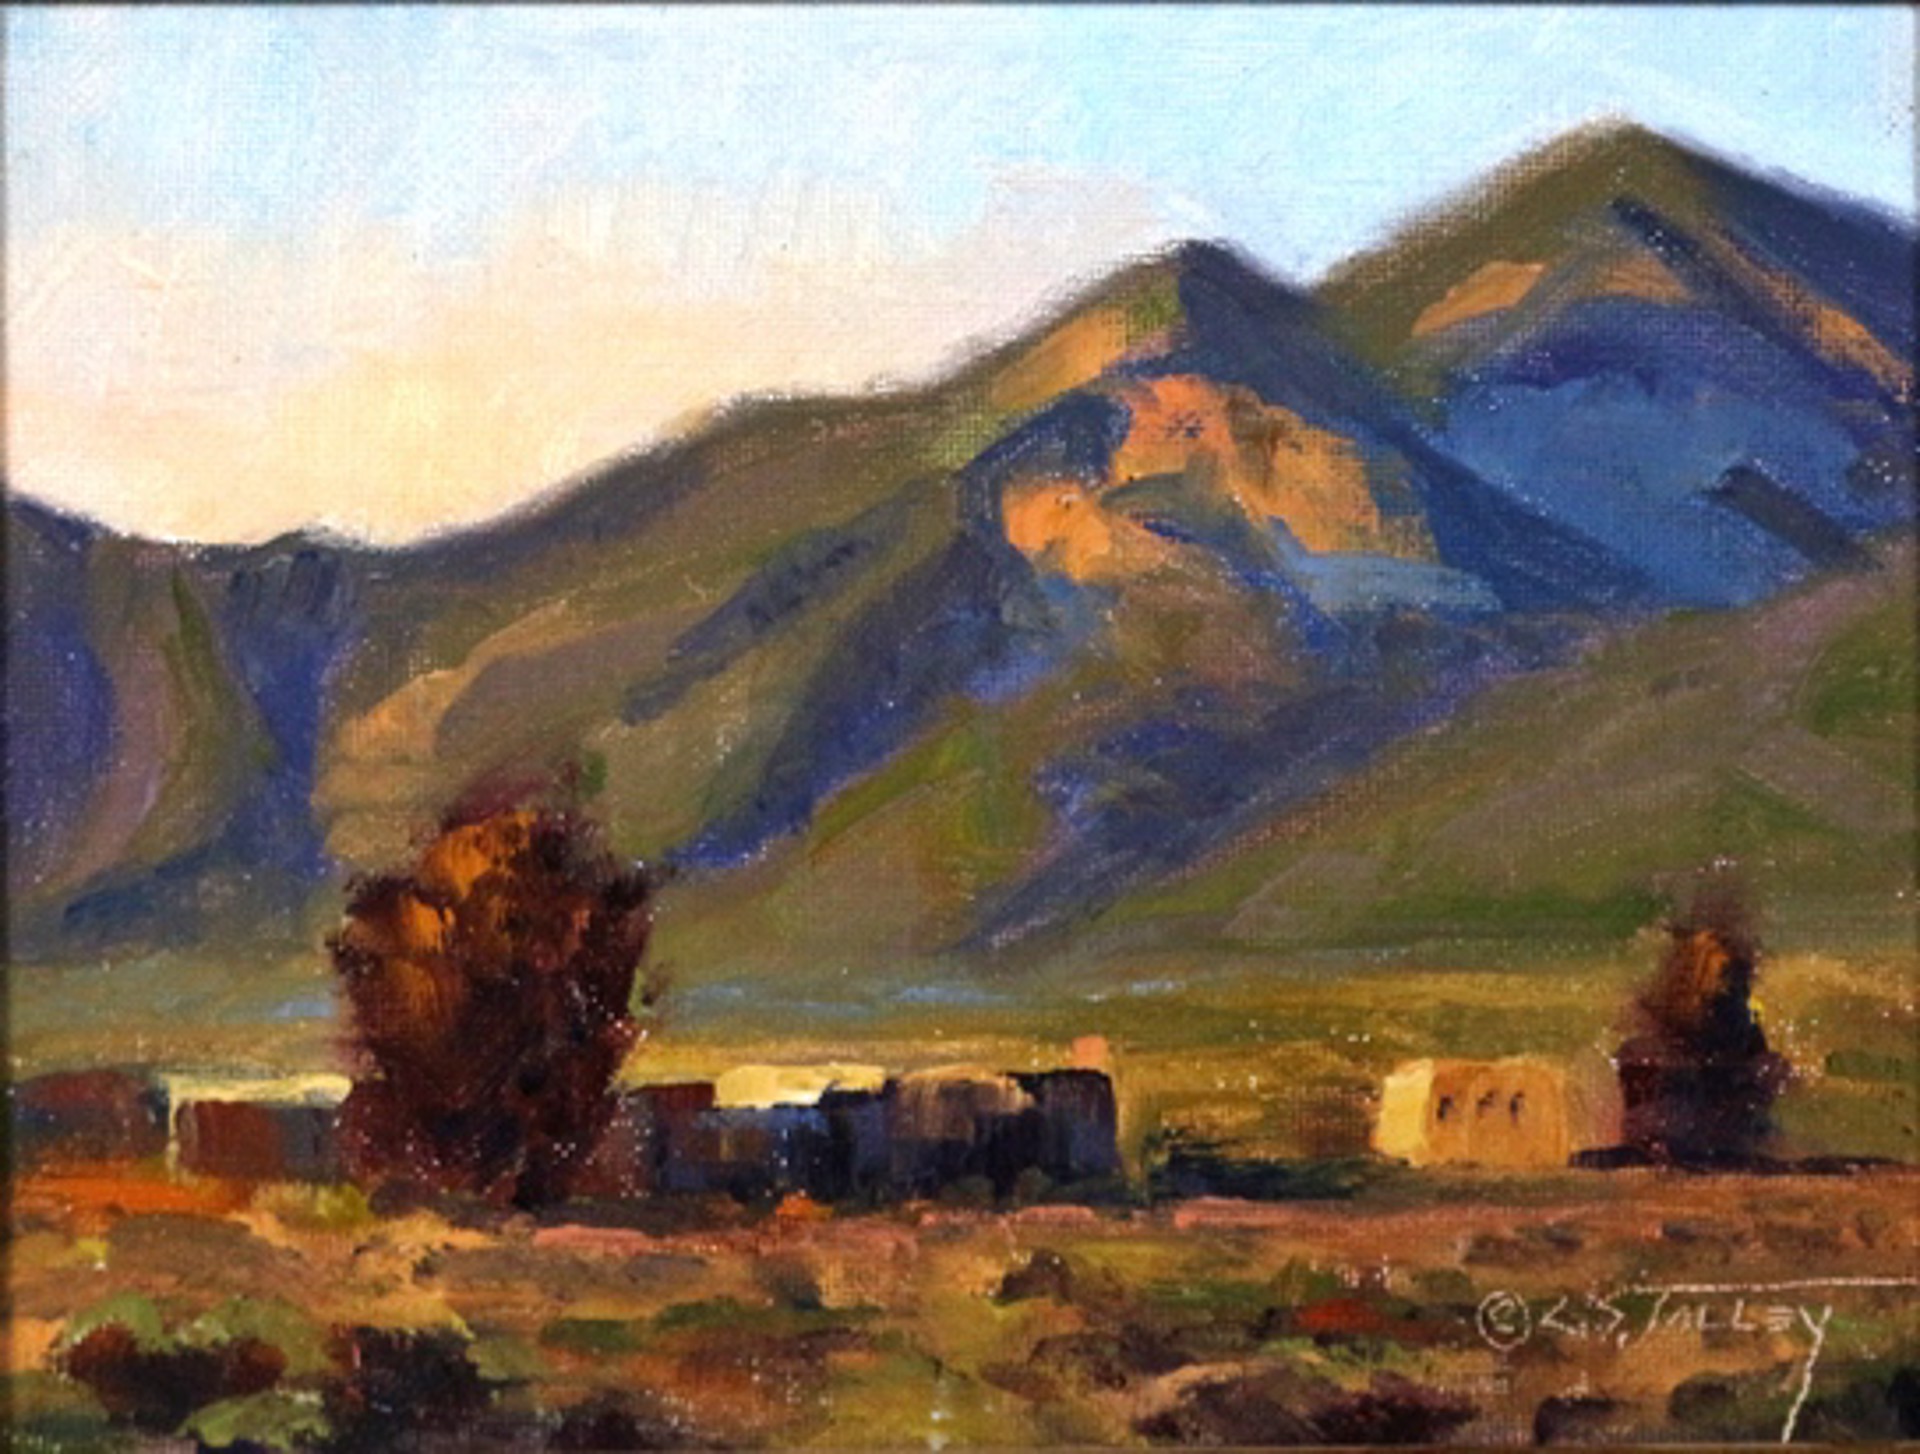 New Mexico's Northern Mountains by C. S. Talley